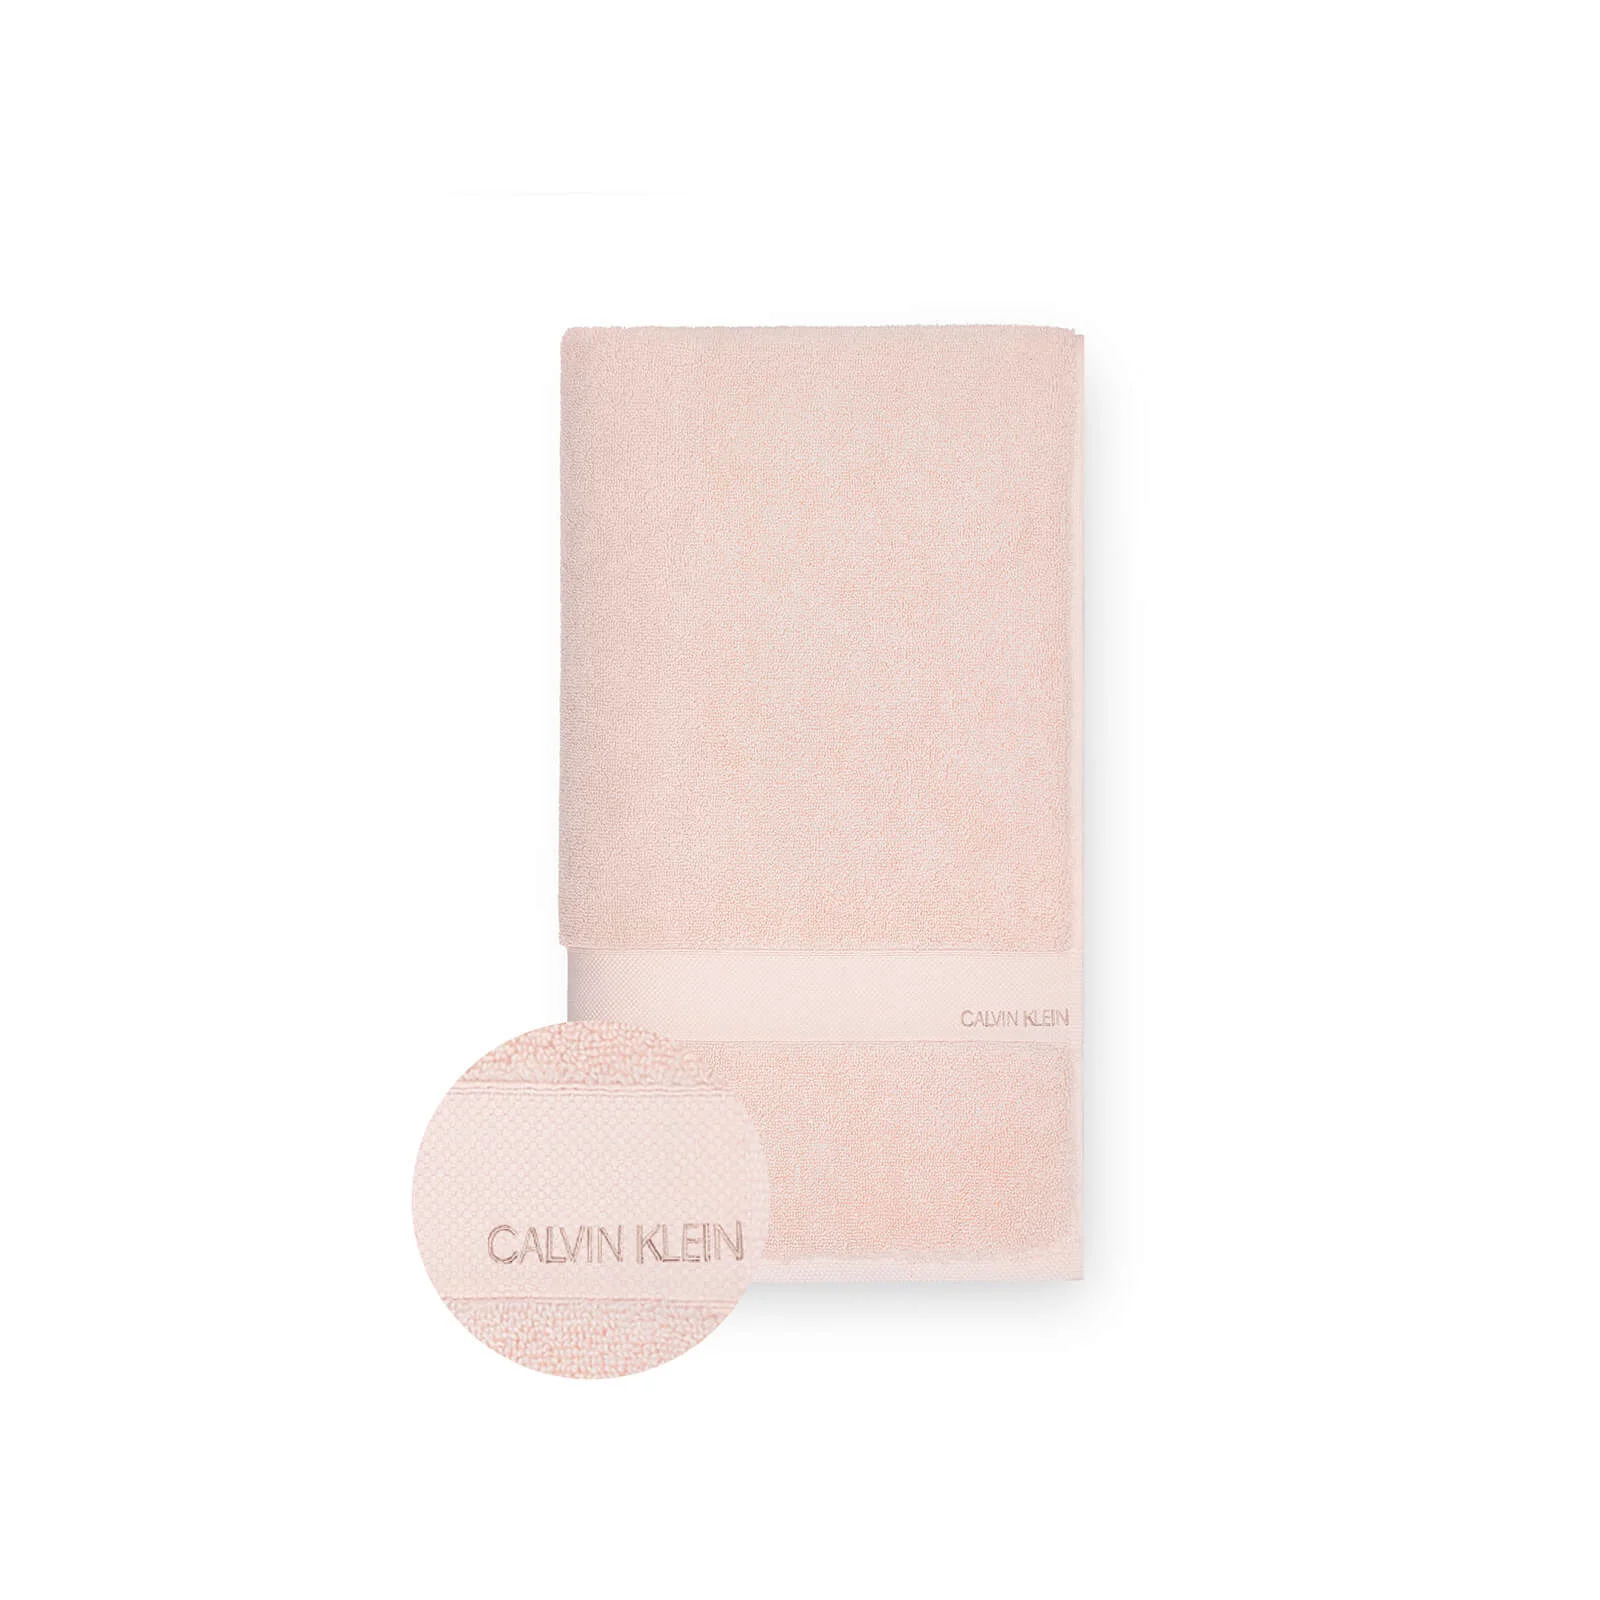 Calvin Klein Tracy Hand Towel - Pink Image 1